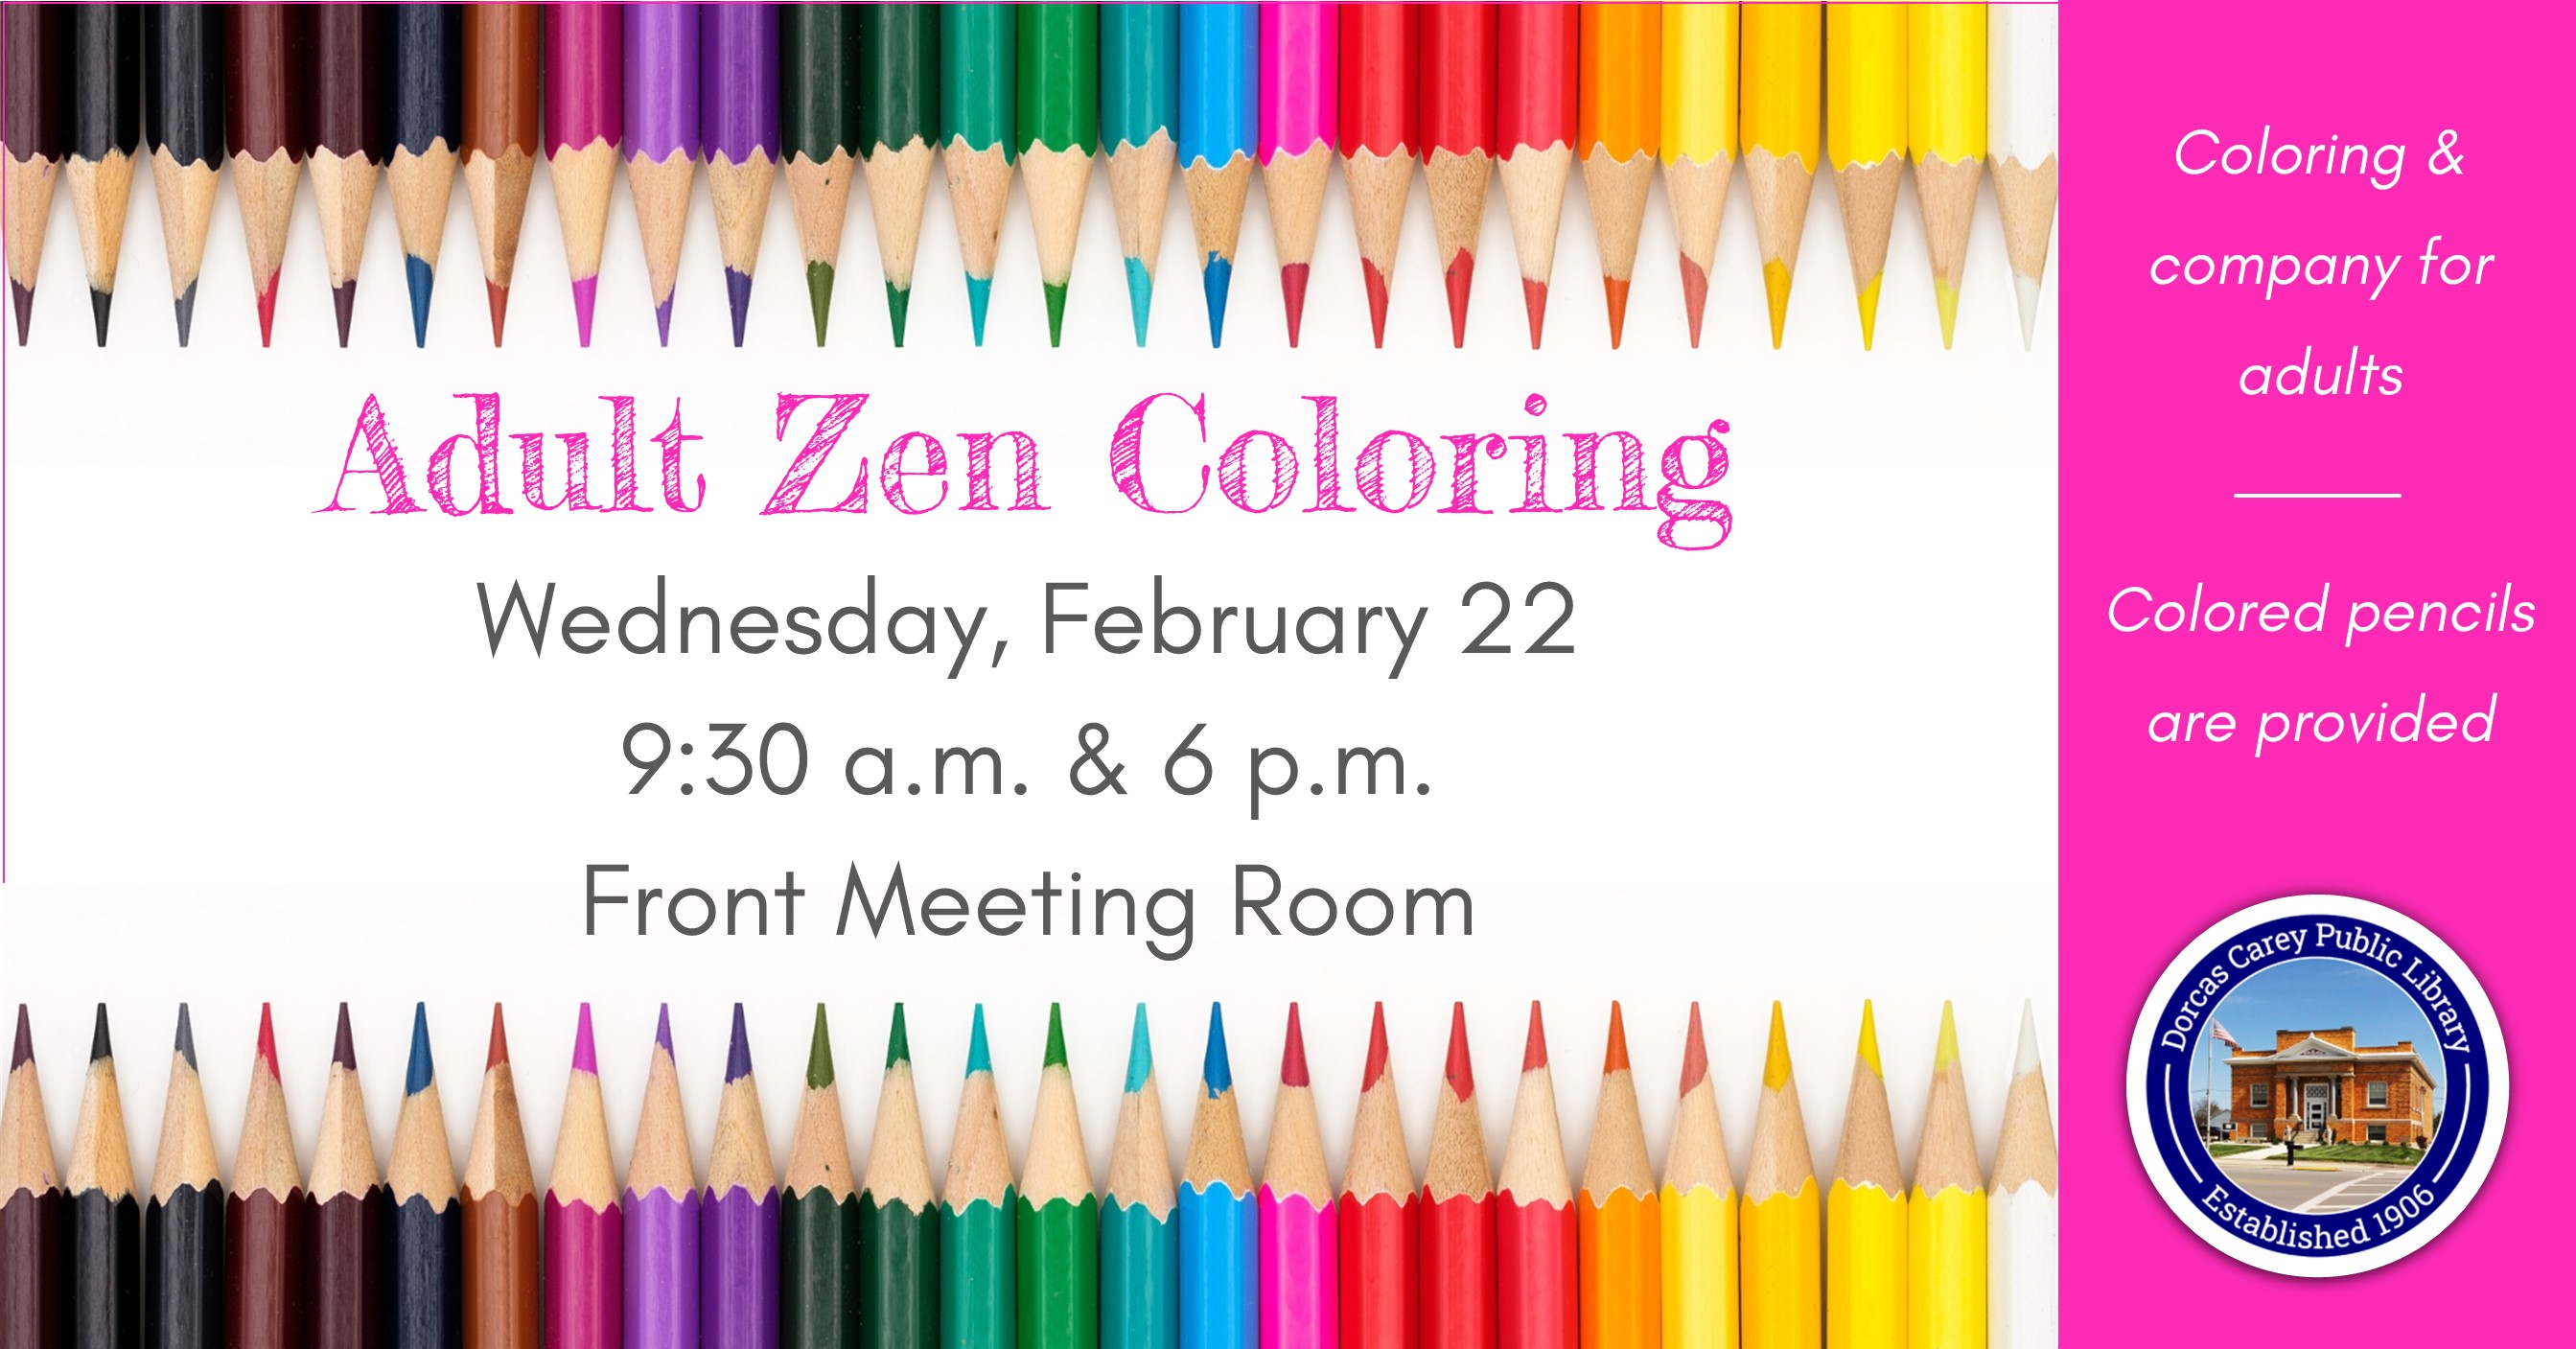 Zen adult coloring is held on the fourth Wednesday of the month at 9:30 a.m. & 6 p.m. Relax and unwind with a new coloring project every month and a sweet snack.